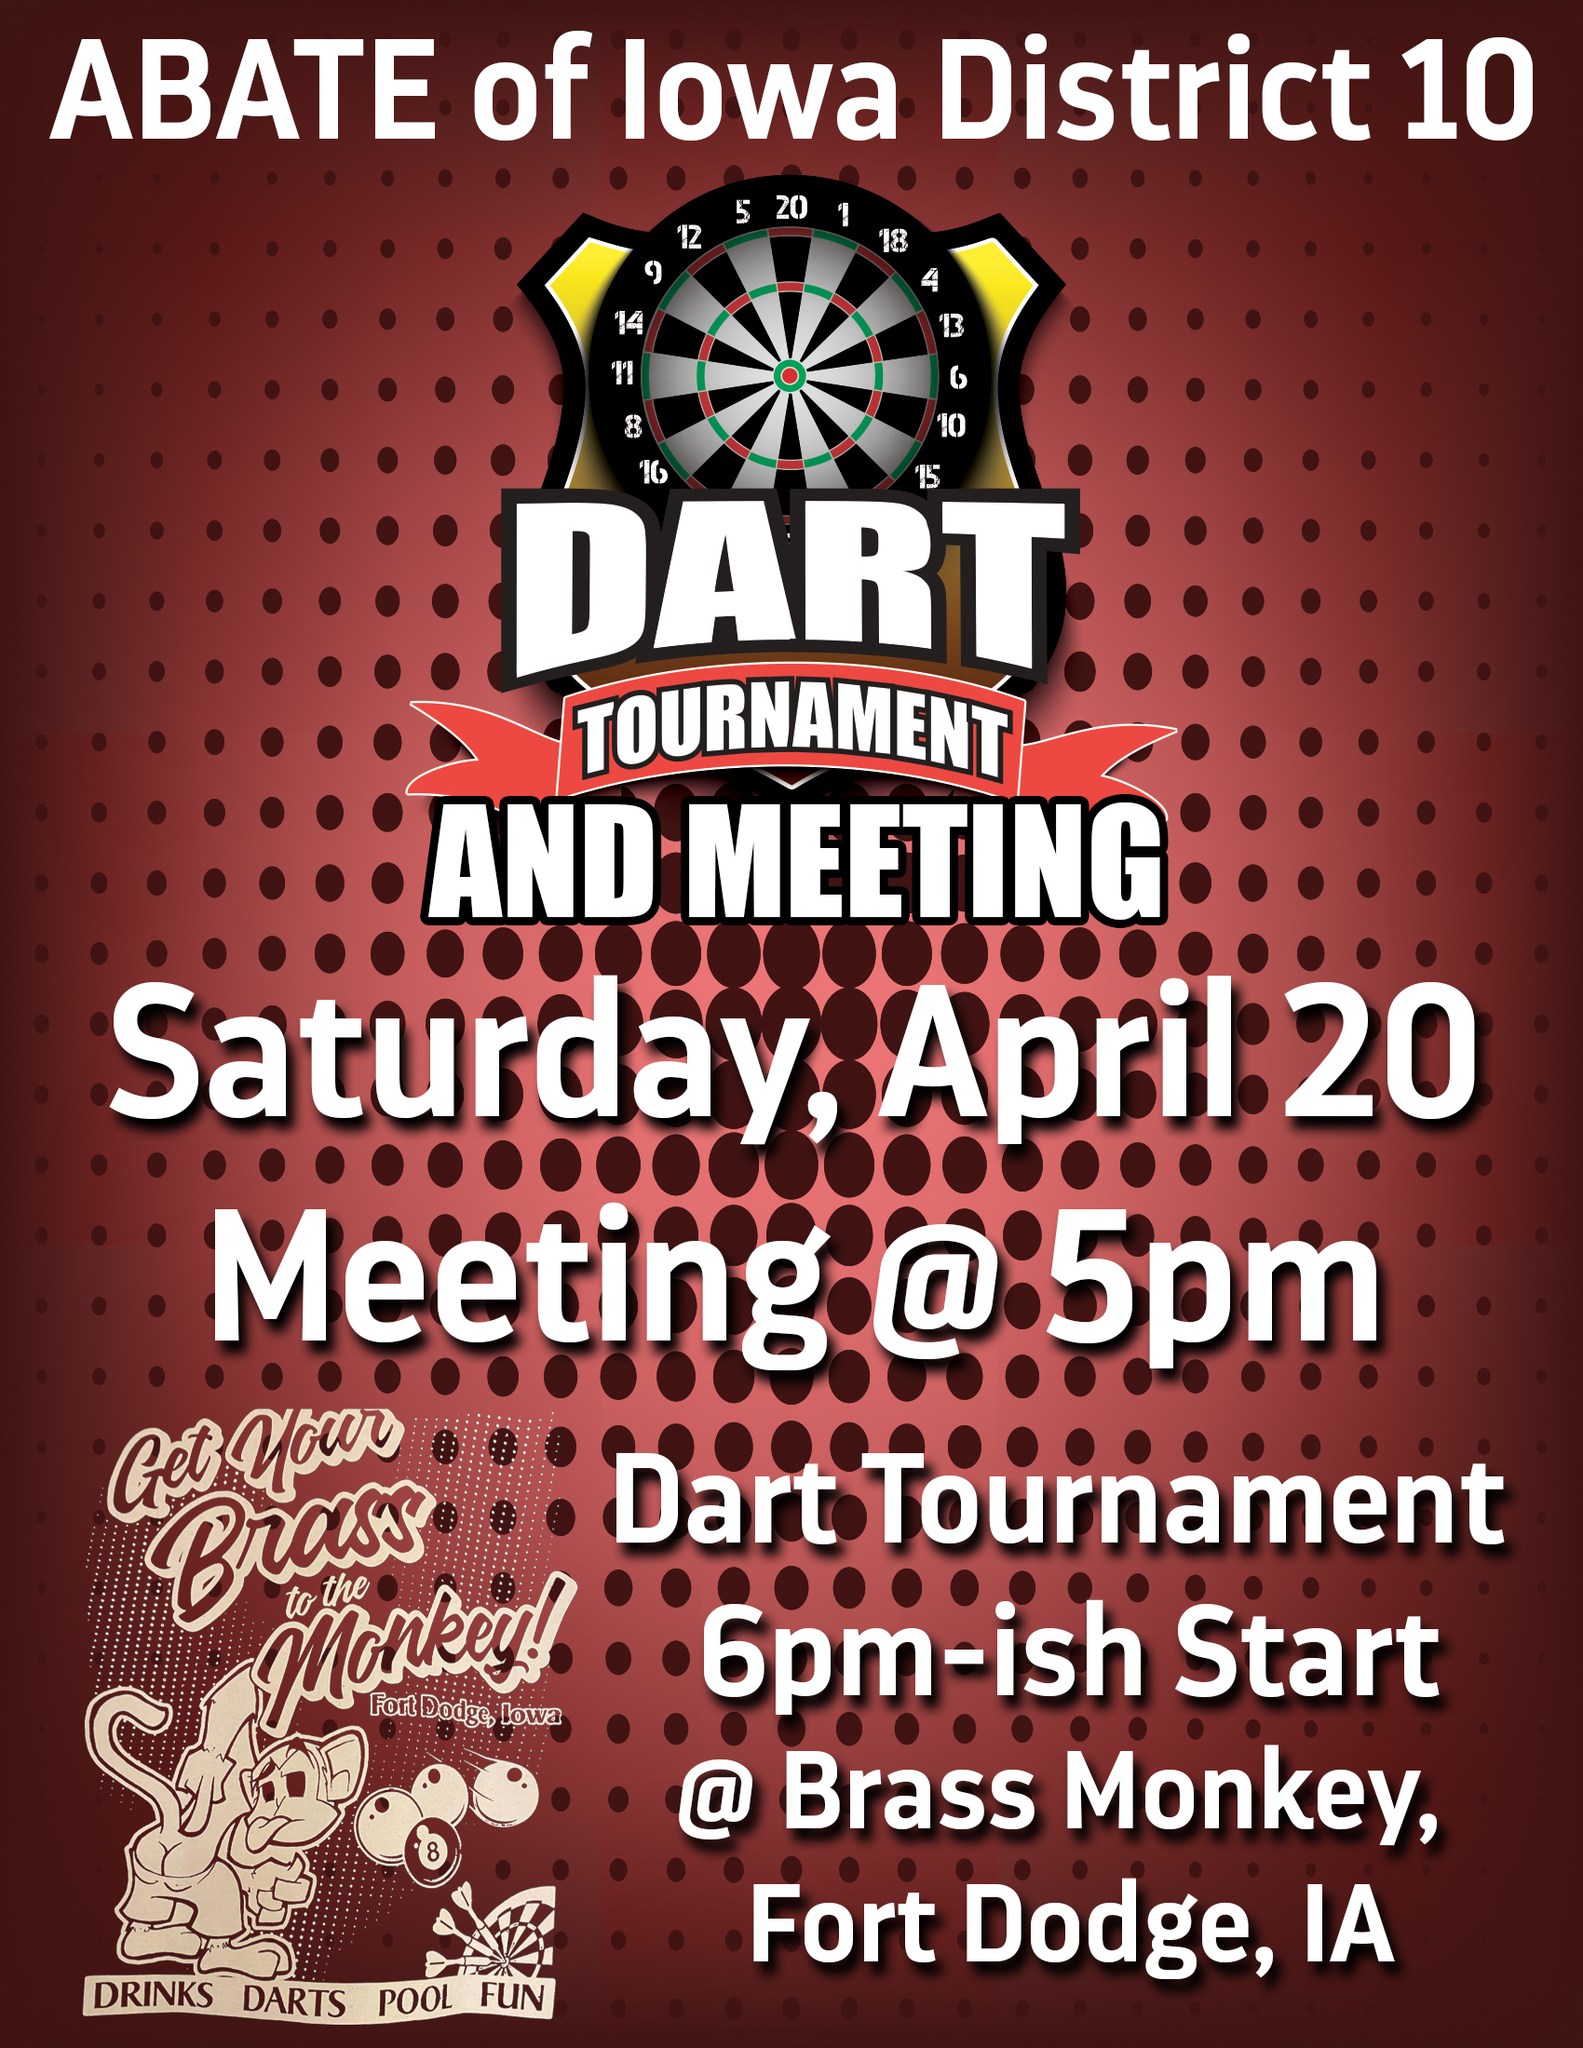 <h1 class="tribe-events-single-event-title">Abate of Iowa District 10 Dart Tournament</h1>